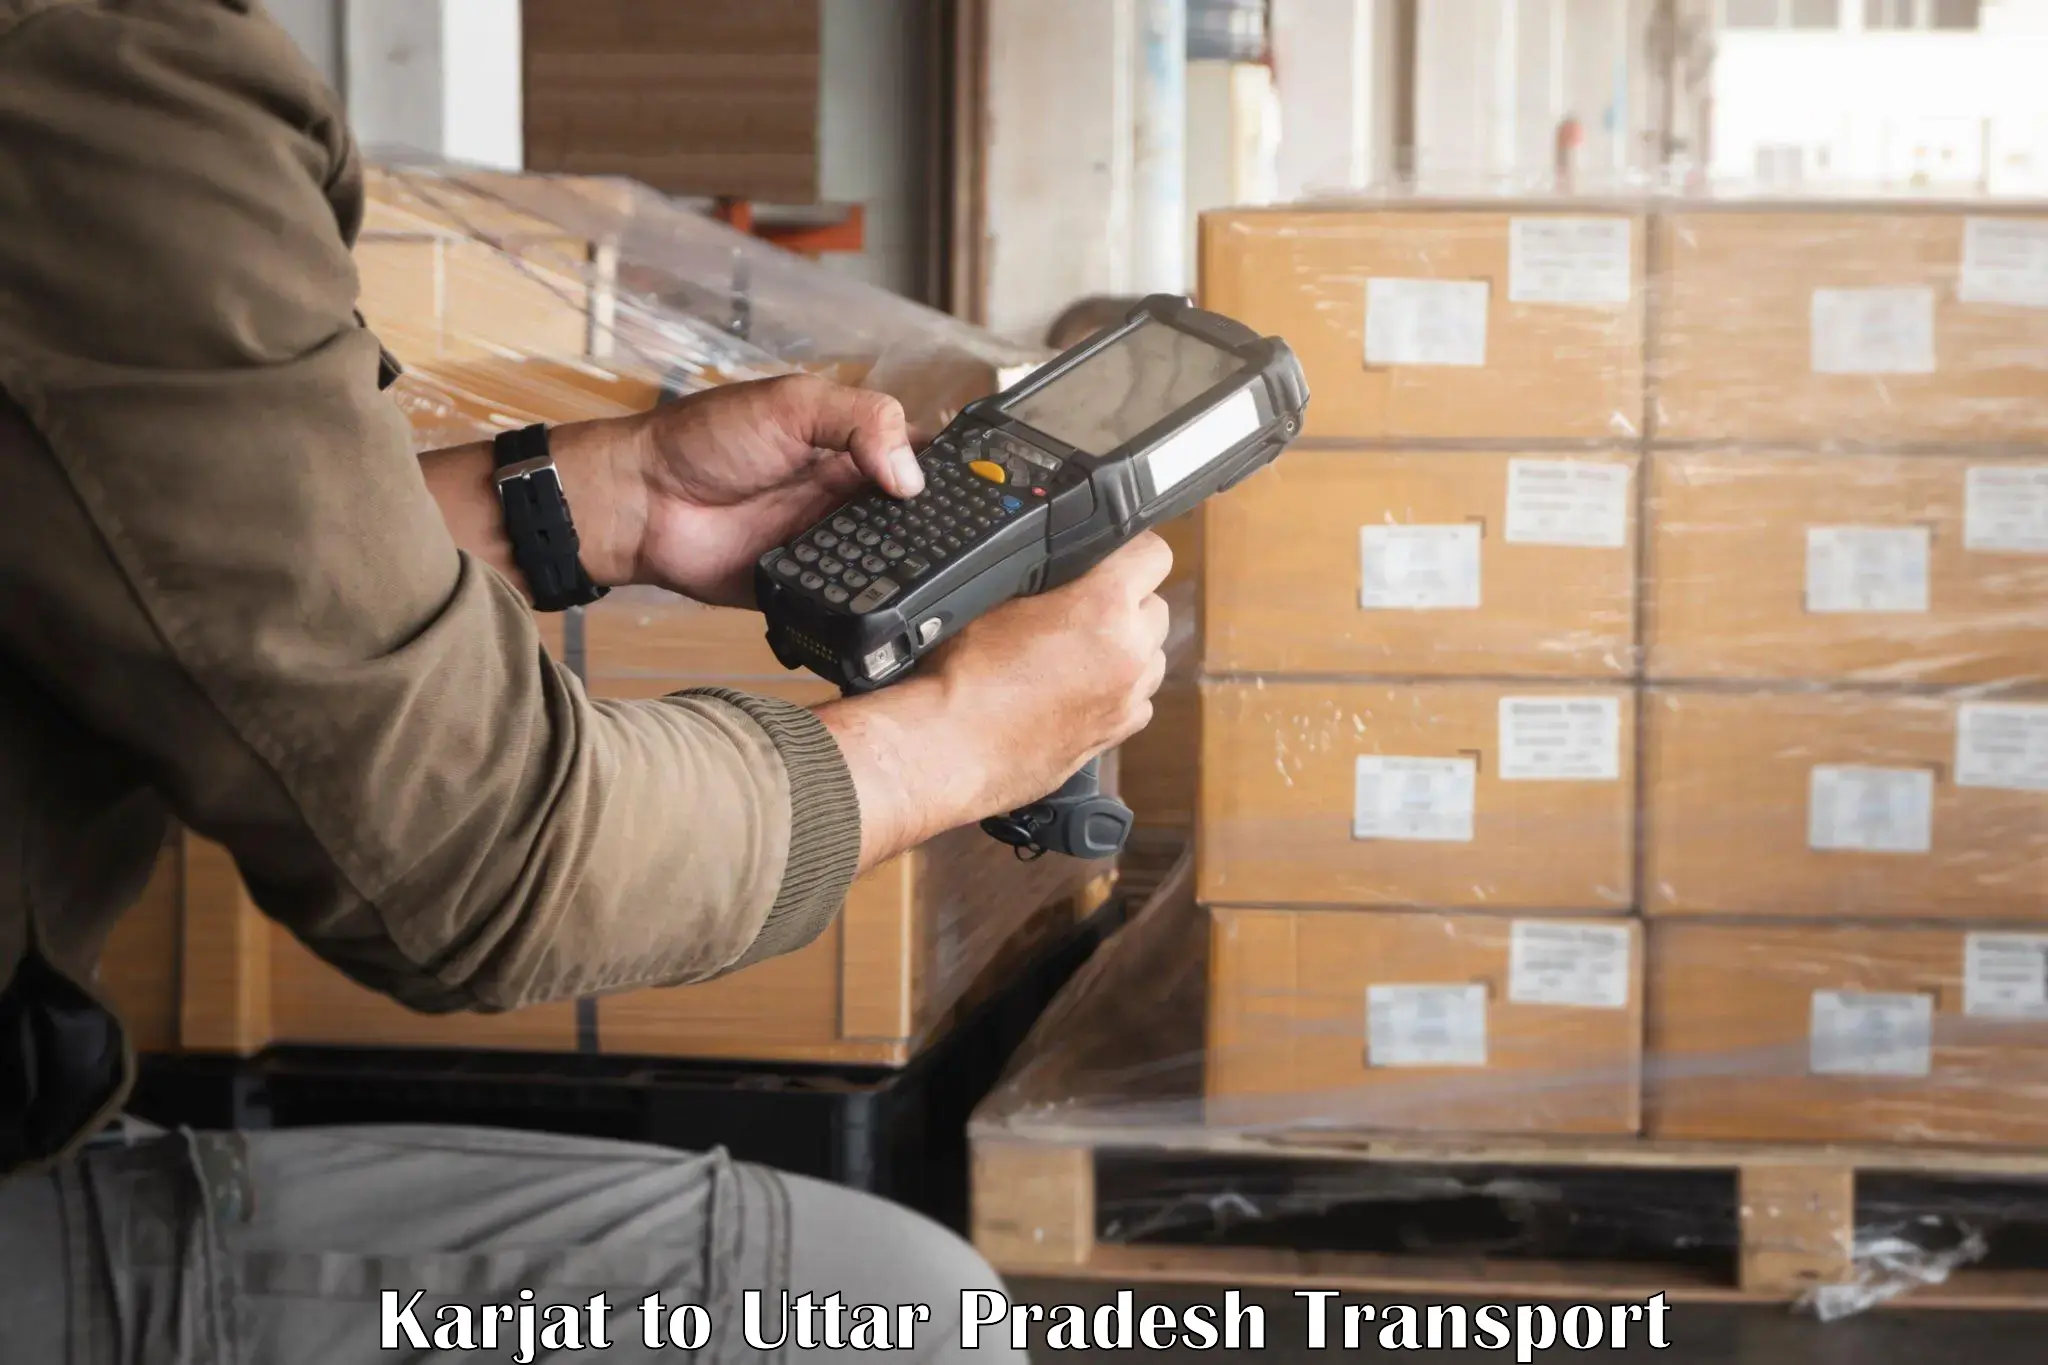 India truck logistics services Karjat to Bhadohi